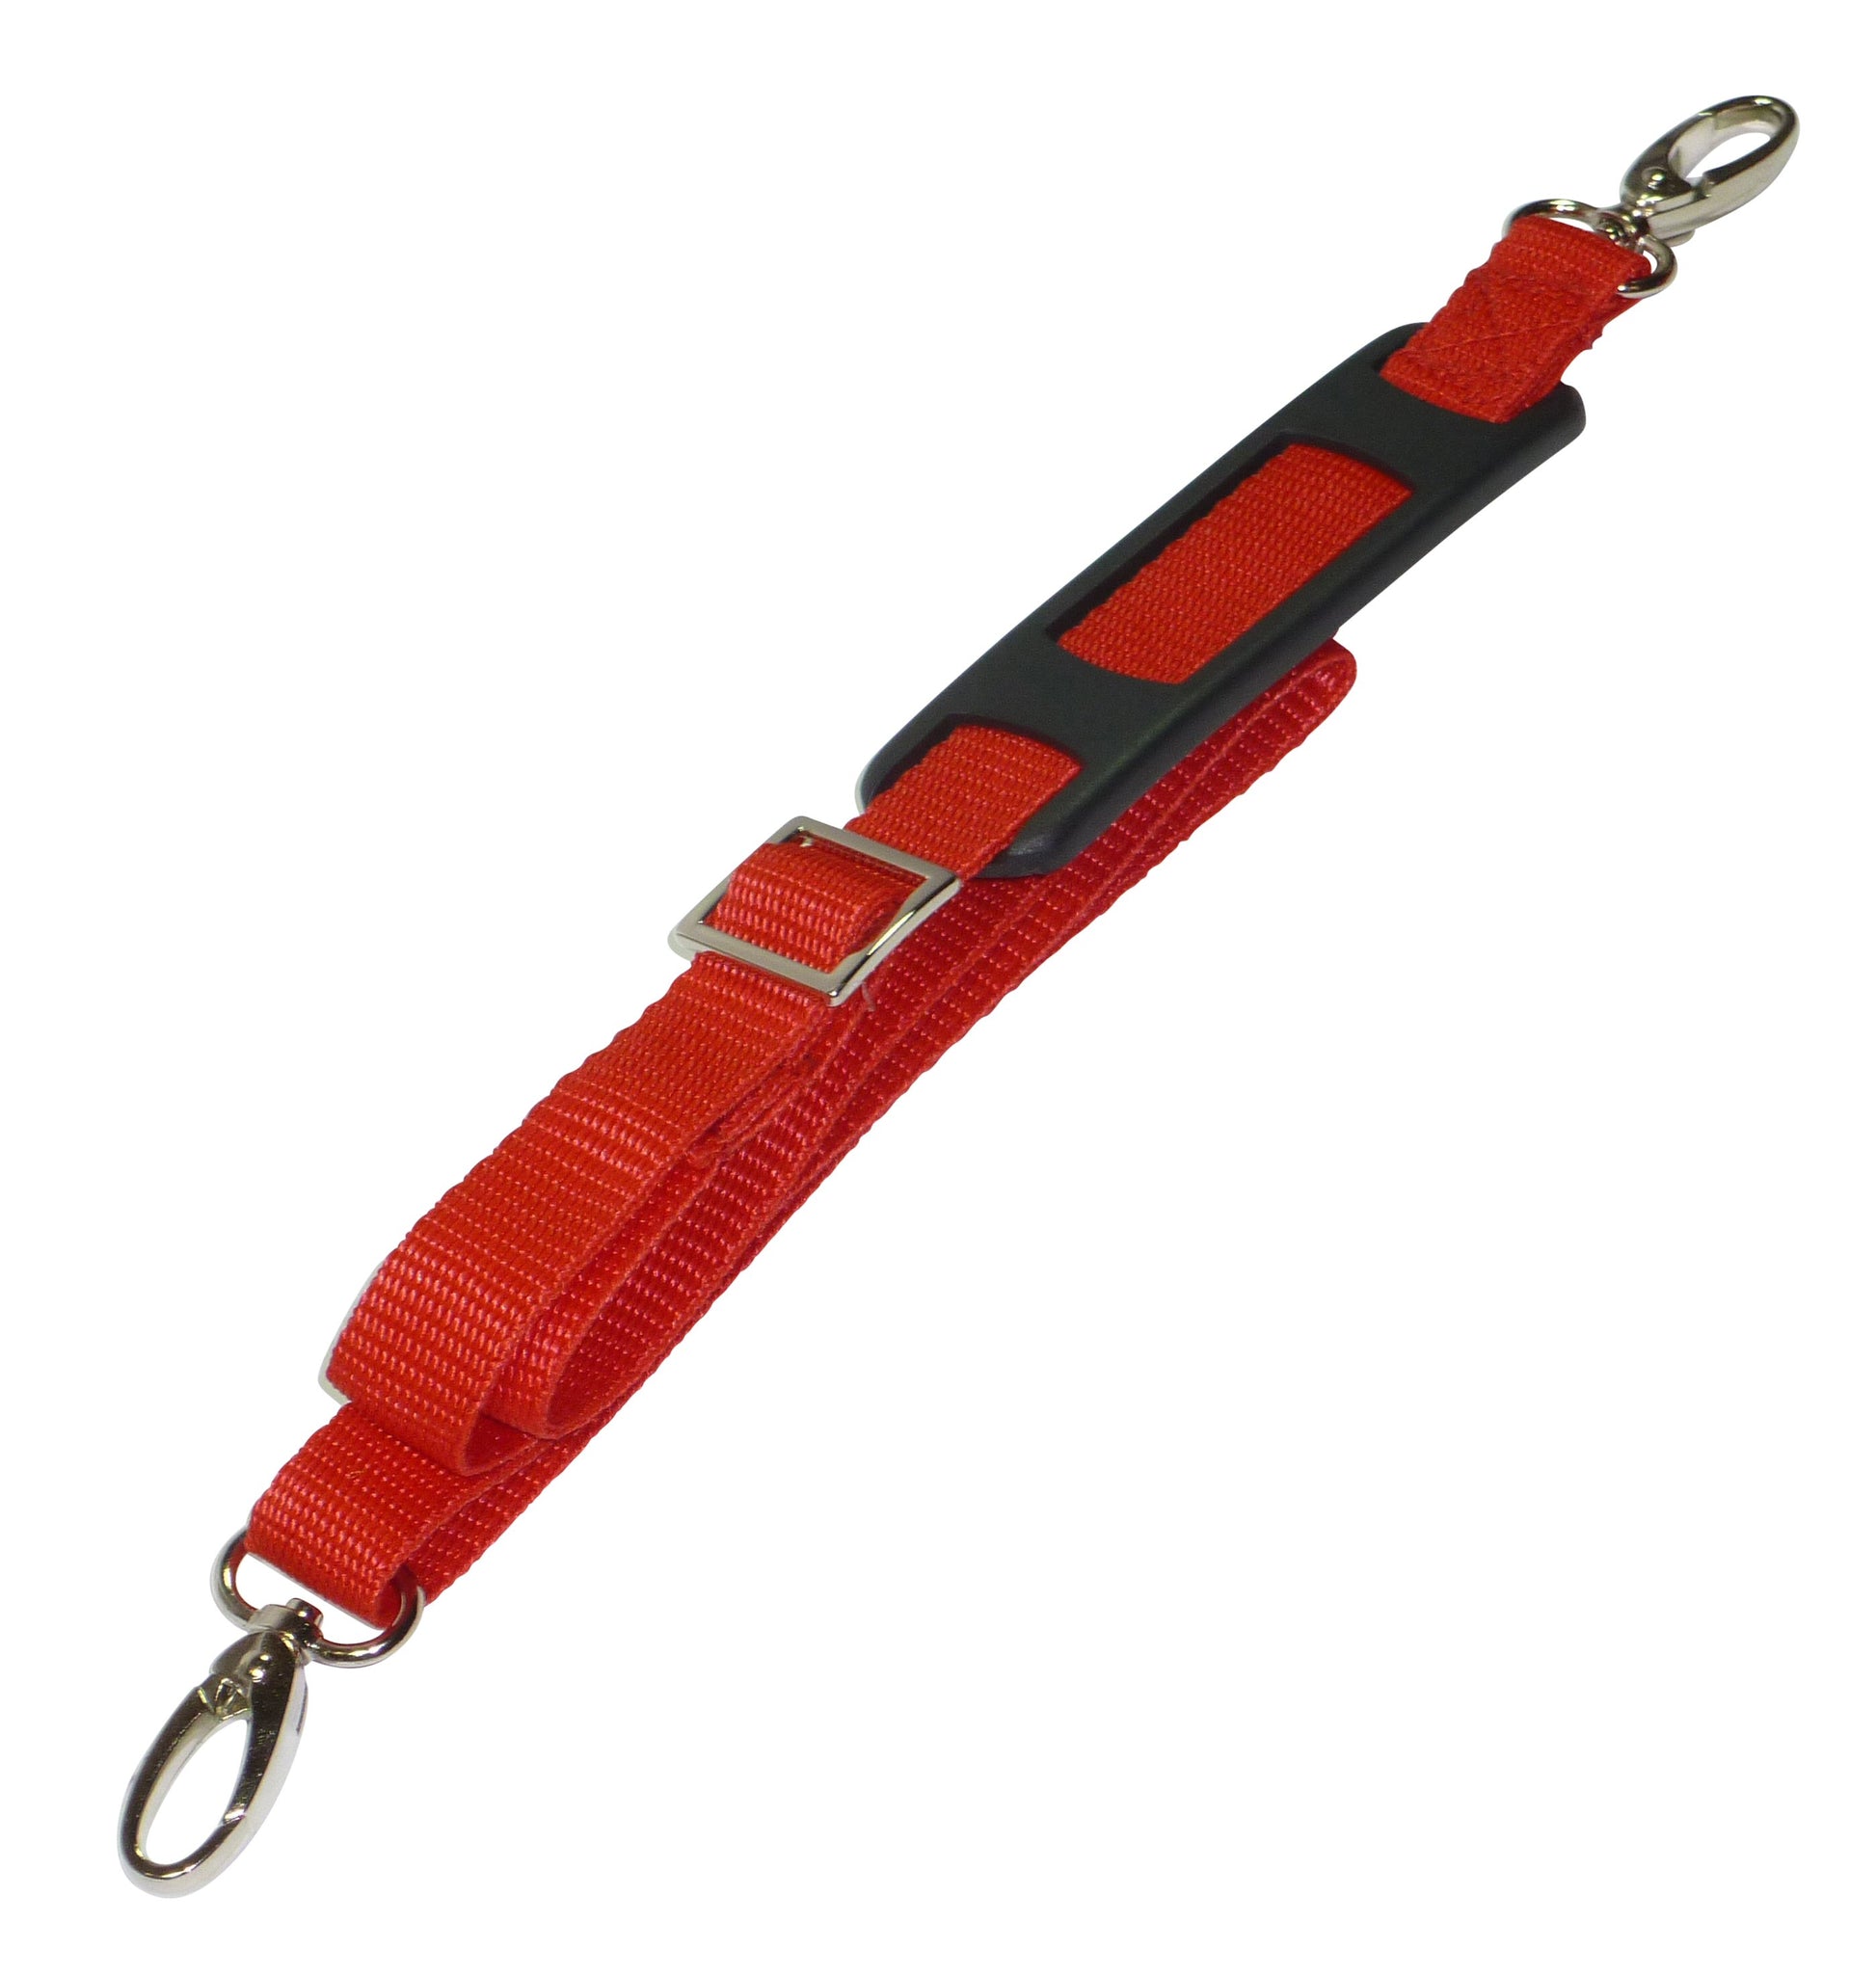 Benristraps 20mm Bag Strap with Metal Buckles and Shoulder Pad, 1 Metre in red